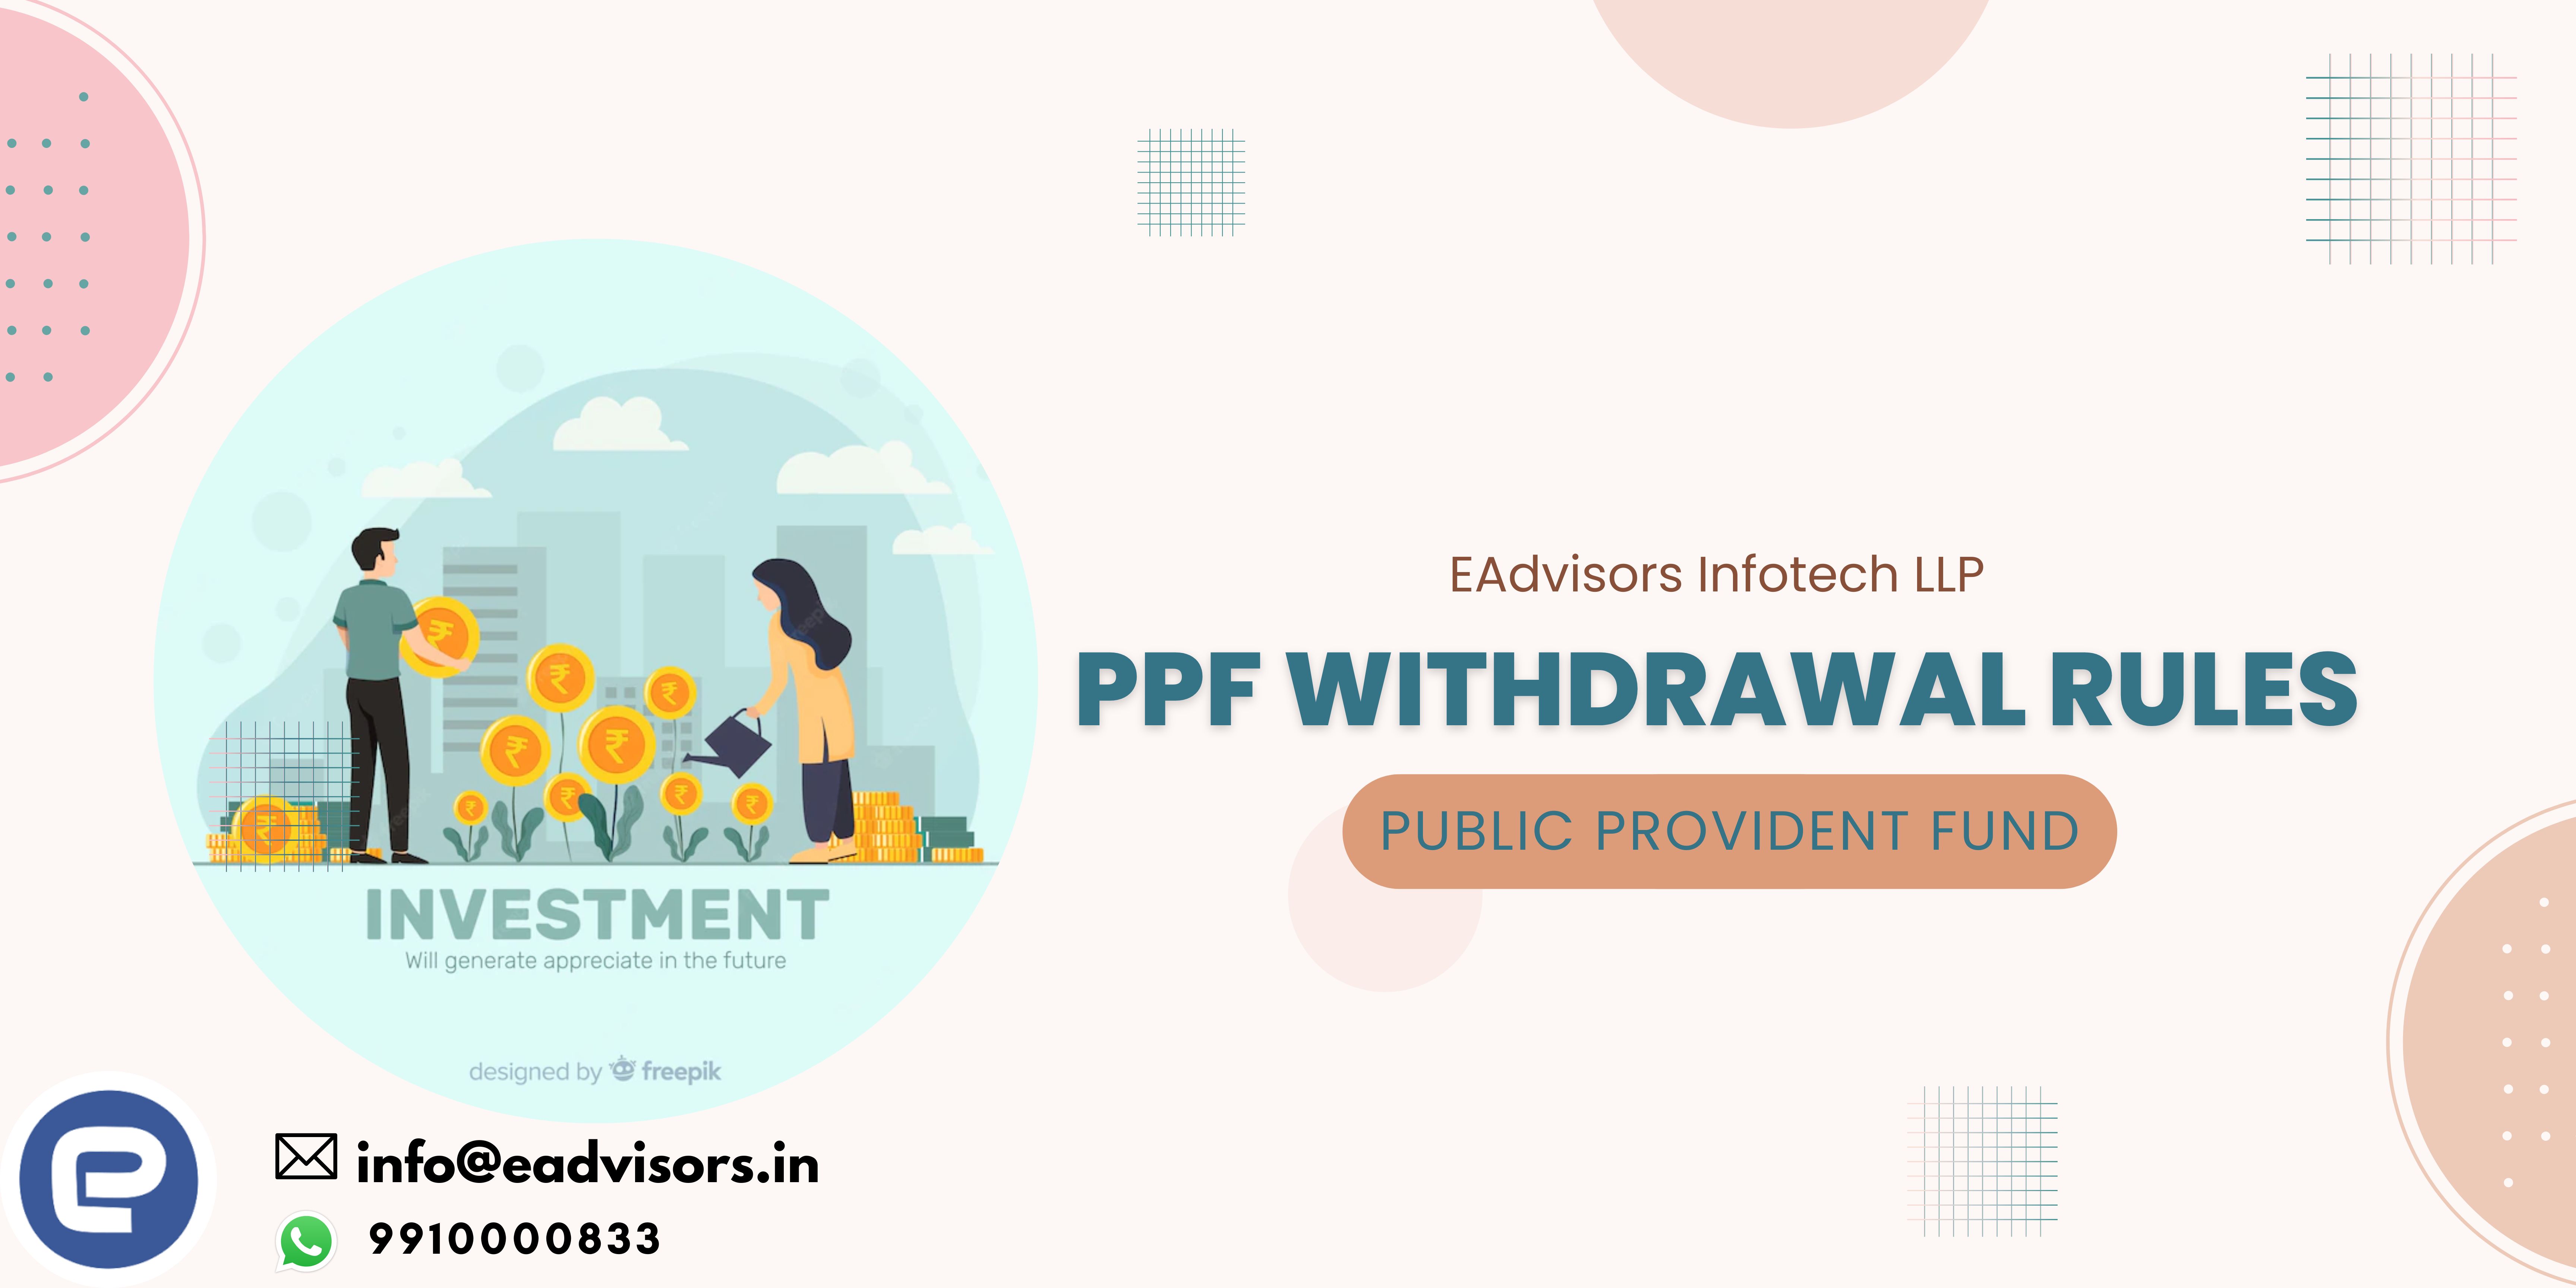 PPF WITHDRAWAL RULES